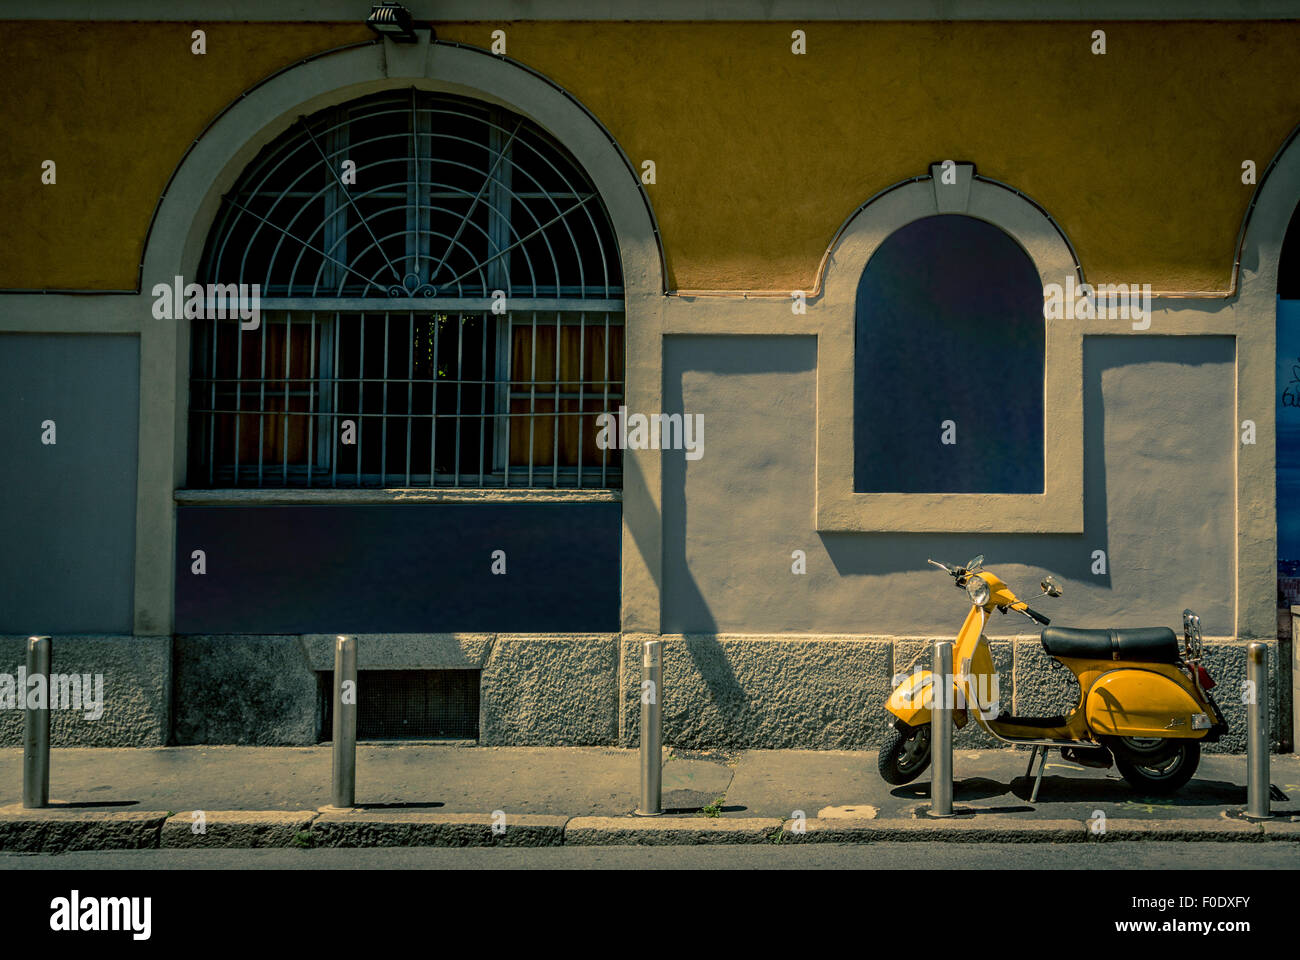 Yellow scooter parked outside a canalside restaurant, Naviglio region of Milan Stock Photo